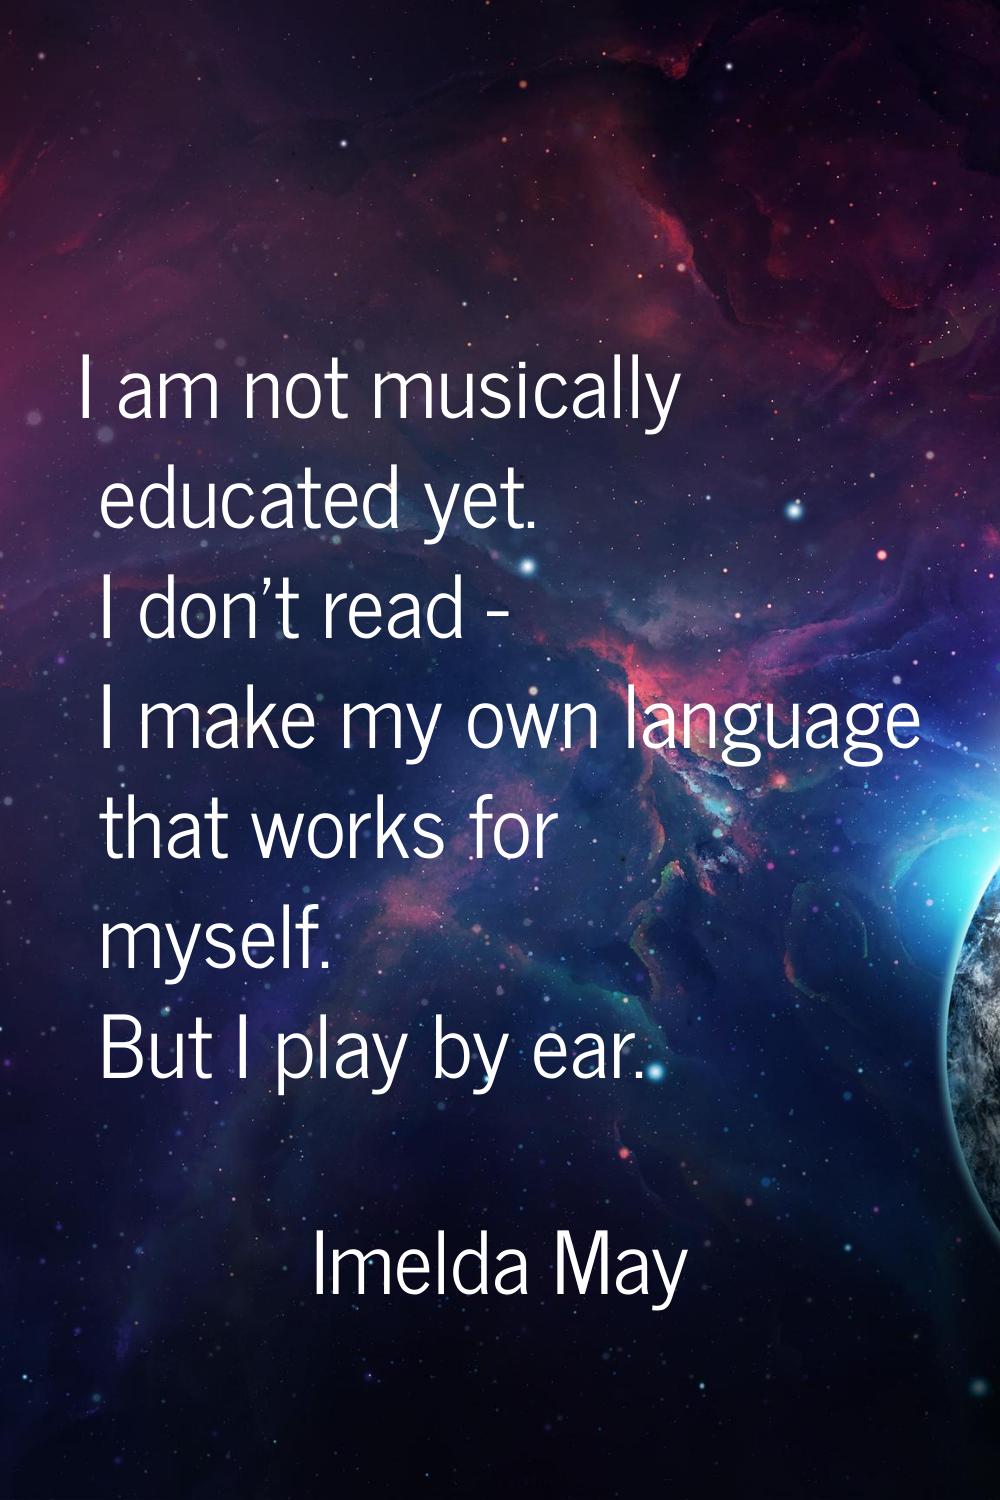 I am not musically educated yet. I don't read - I make my own language that works for myself. But I